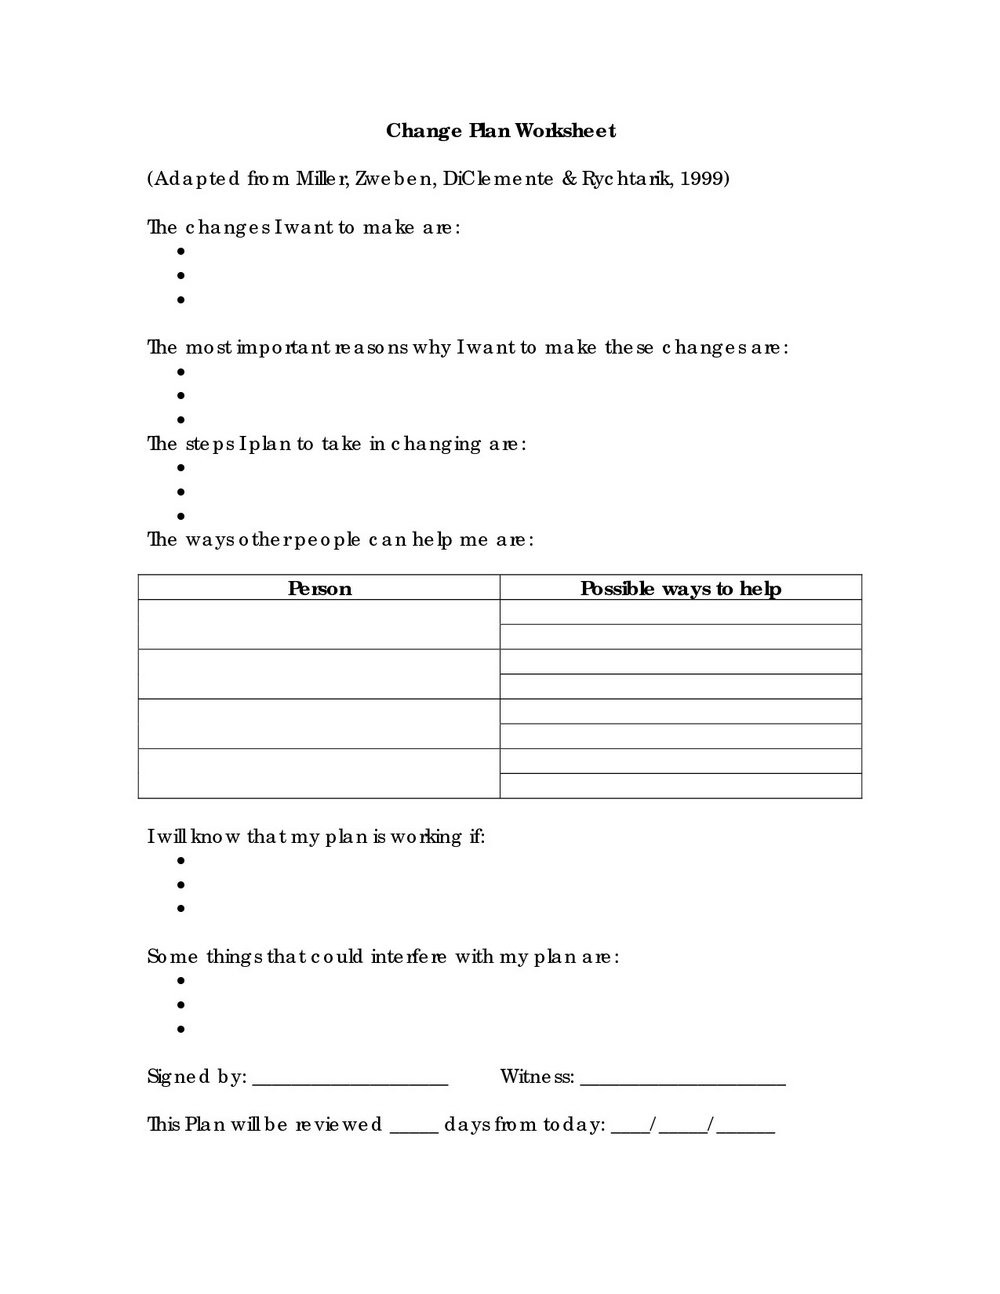 Drug Abuse Worksheets For Adults  Universal Network